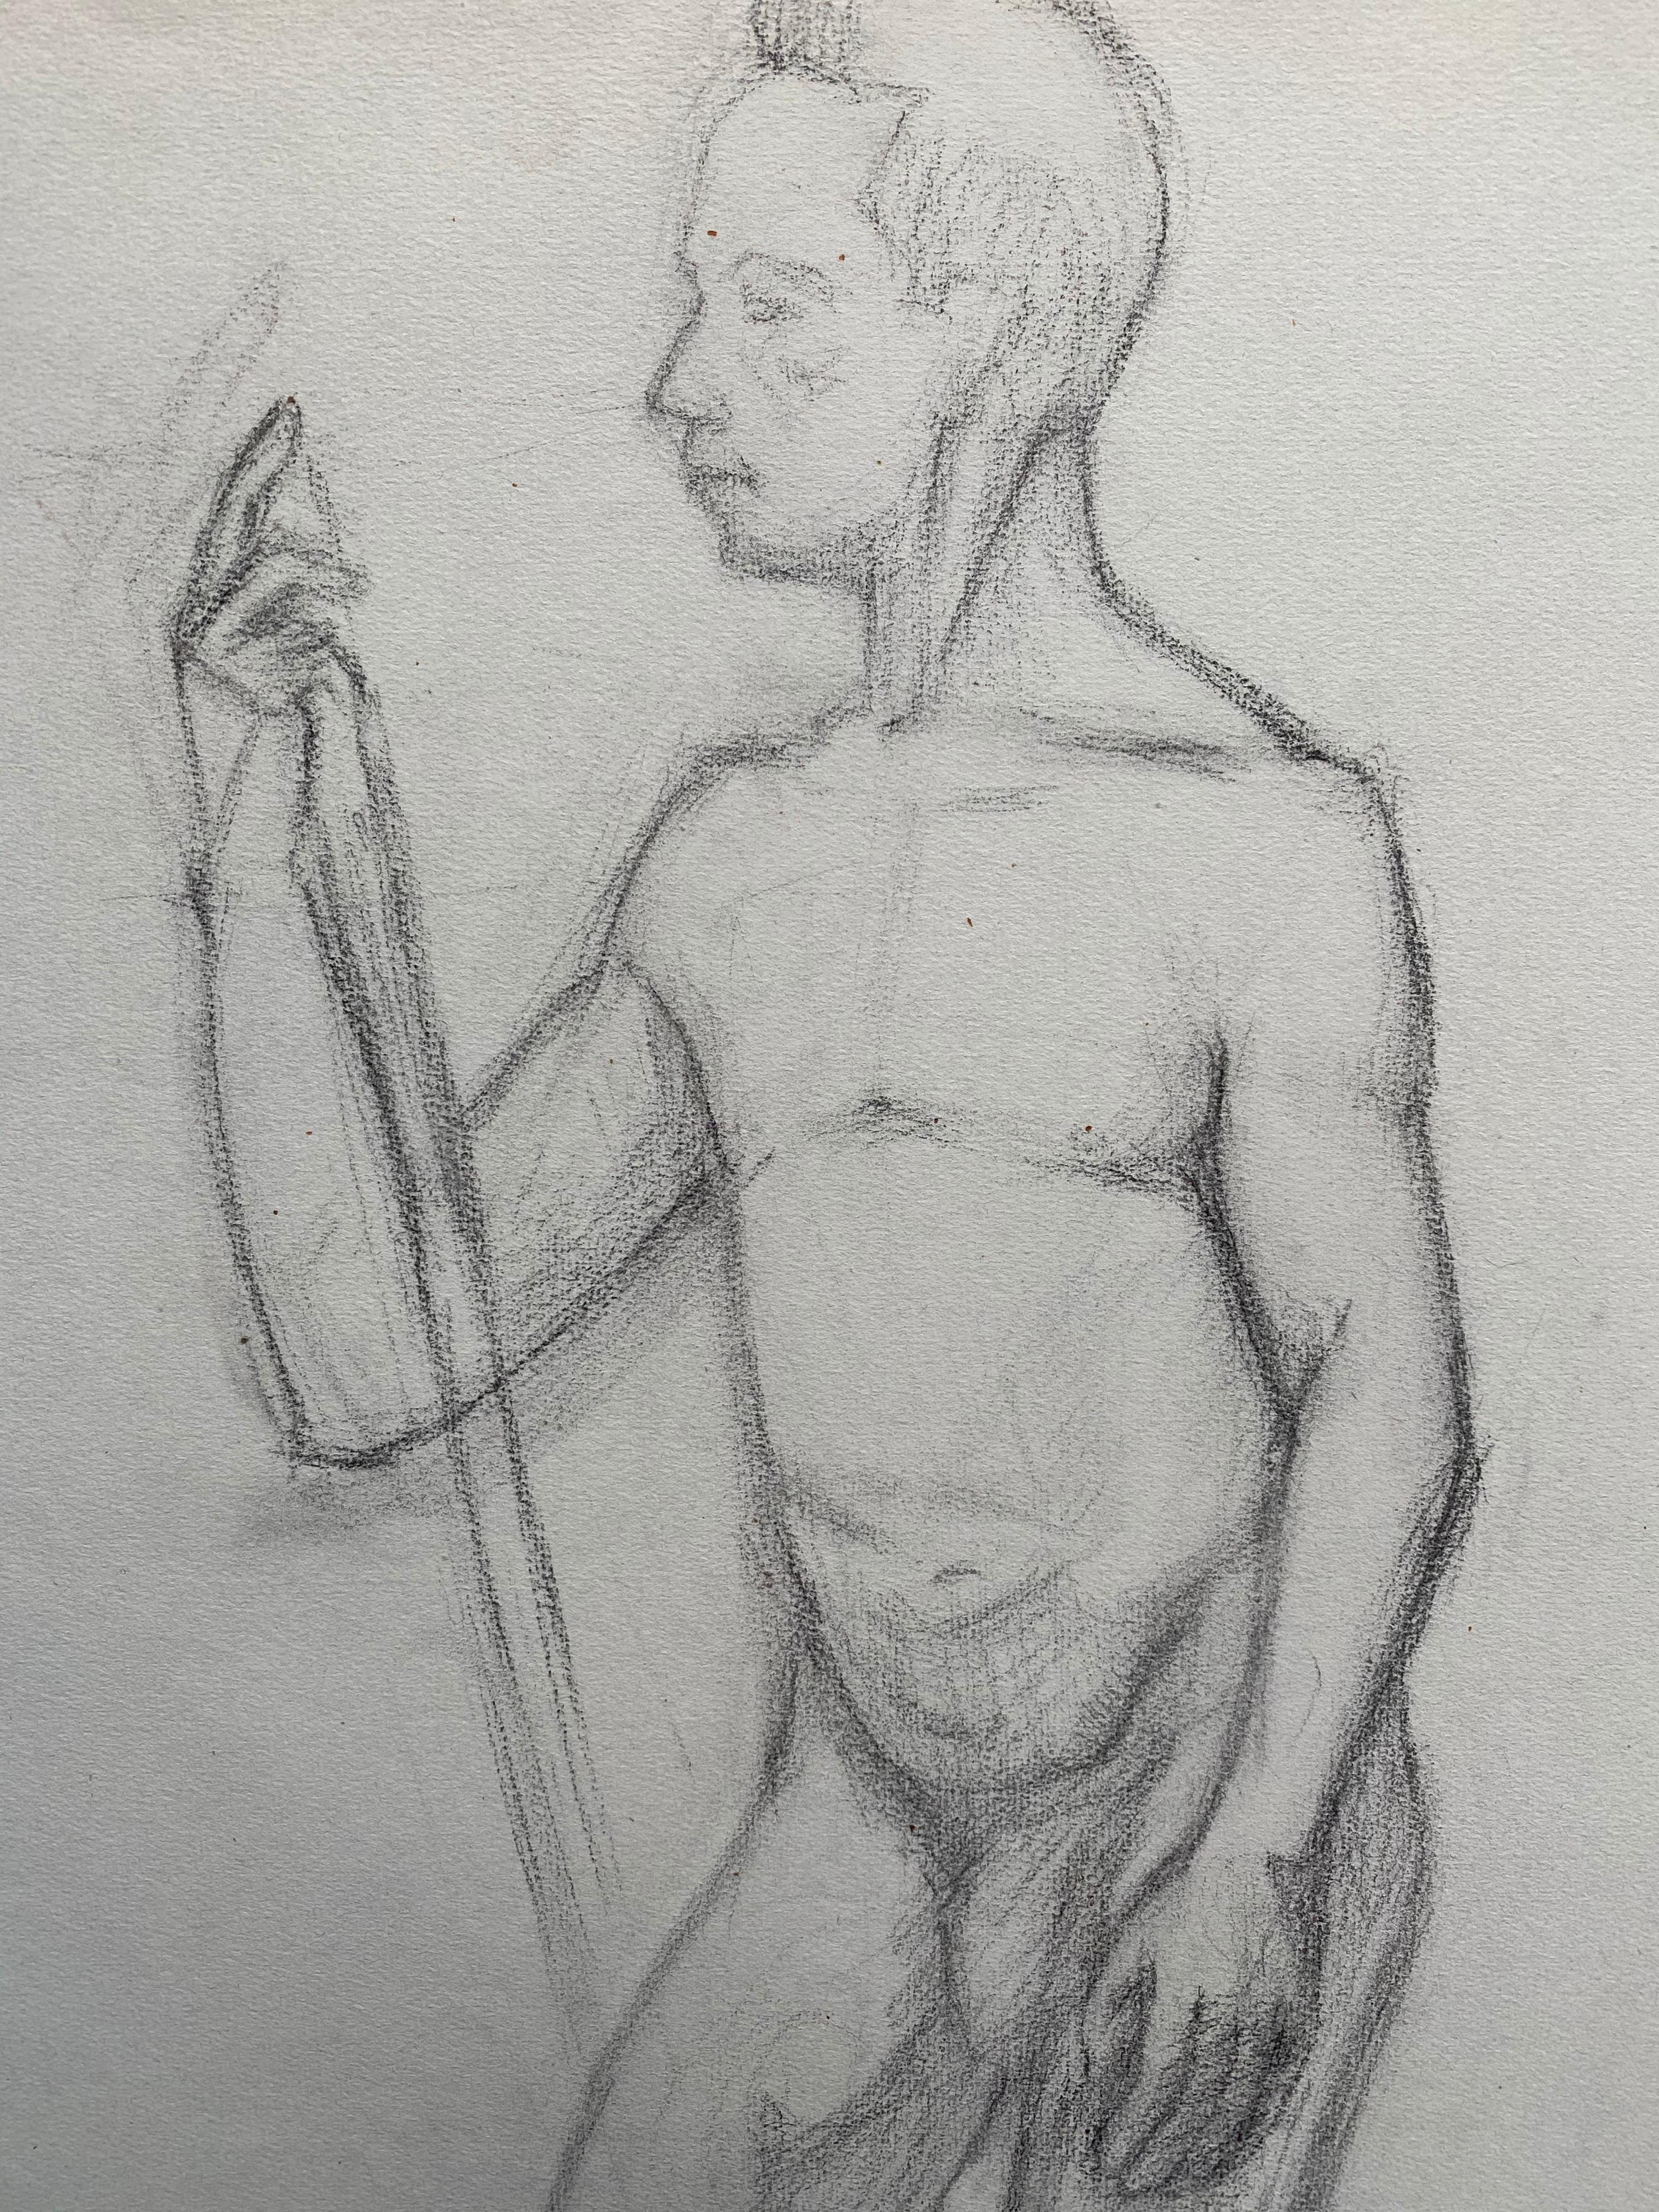 Mid 20th Century French Charcoal Drawing - Portrait of a Standing Nude Man